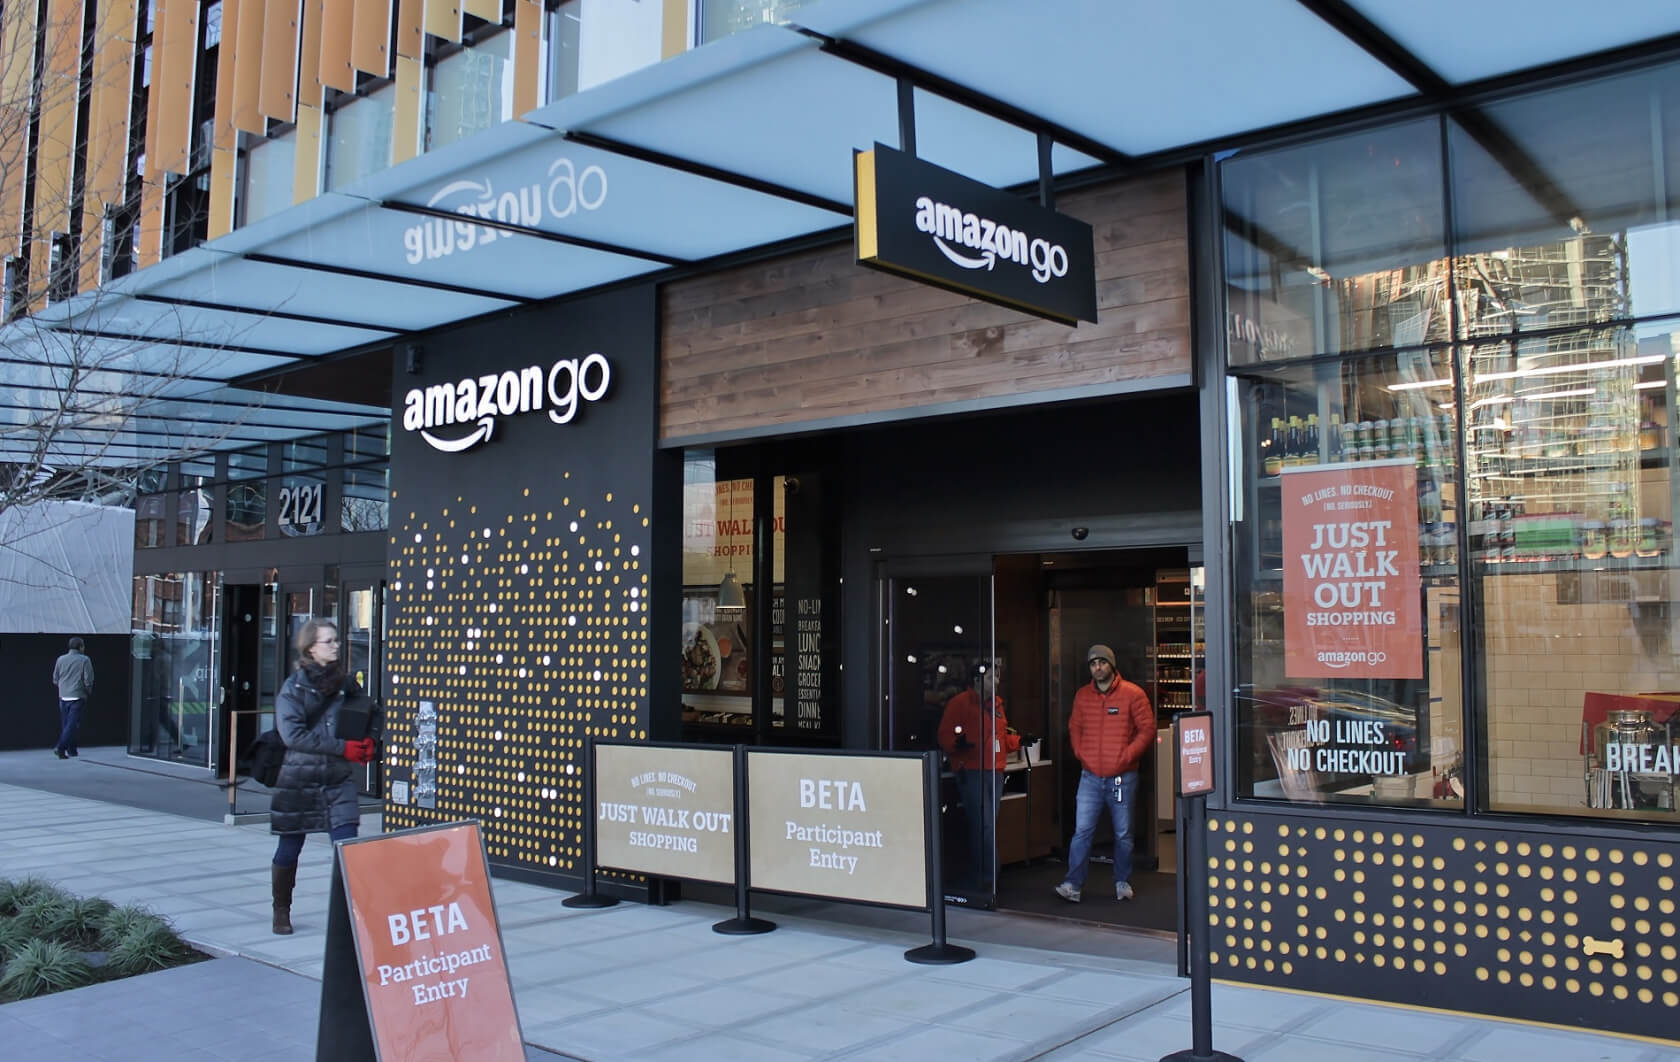 Amazon's cashierless store concept is being tested for use in large stores